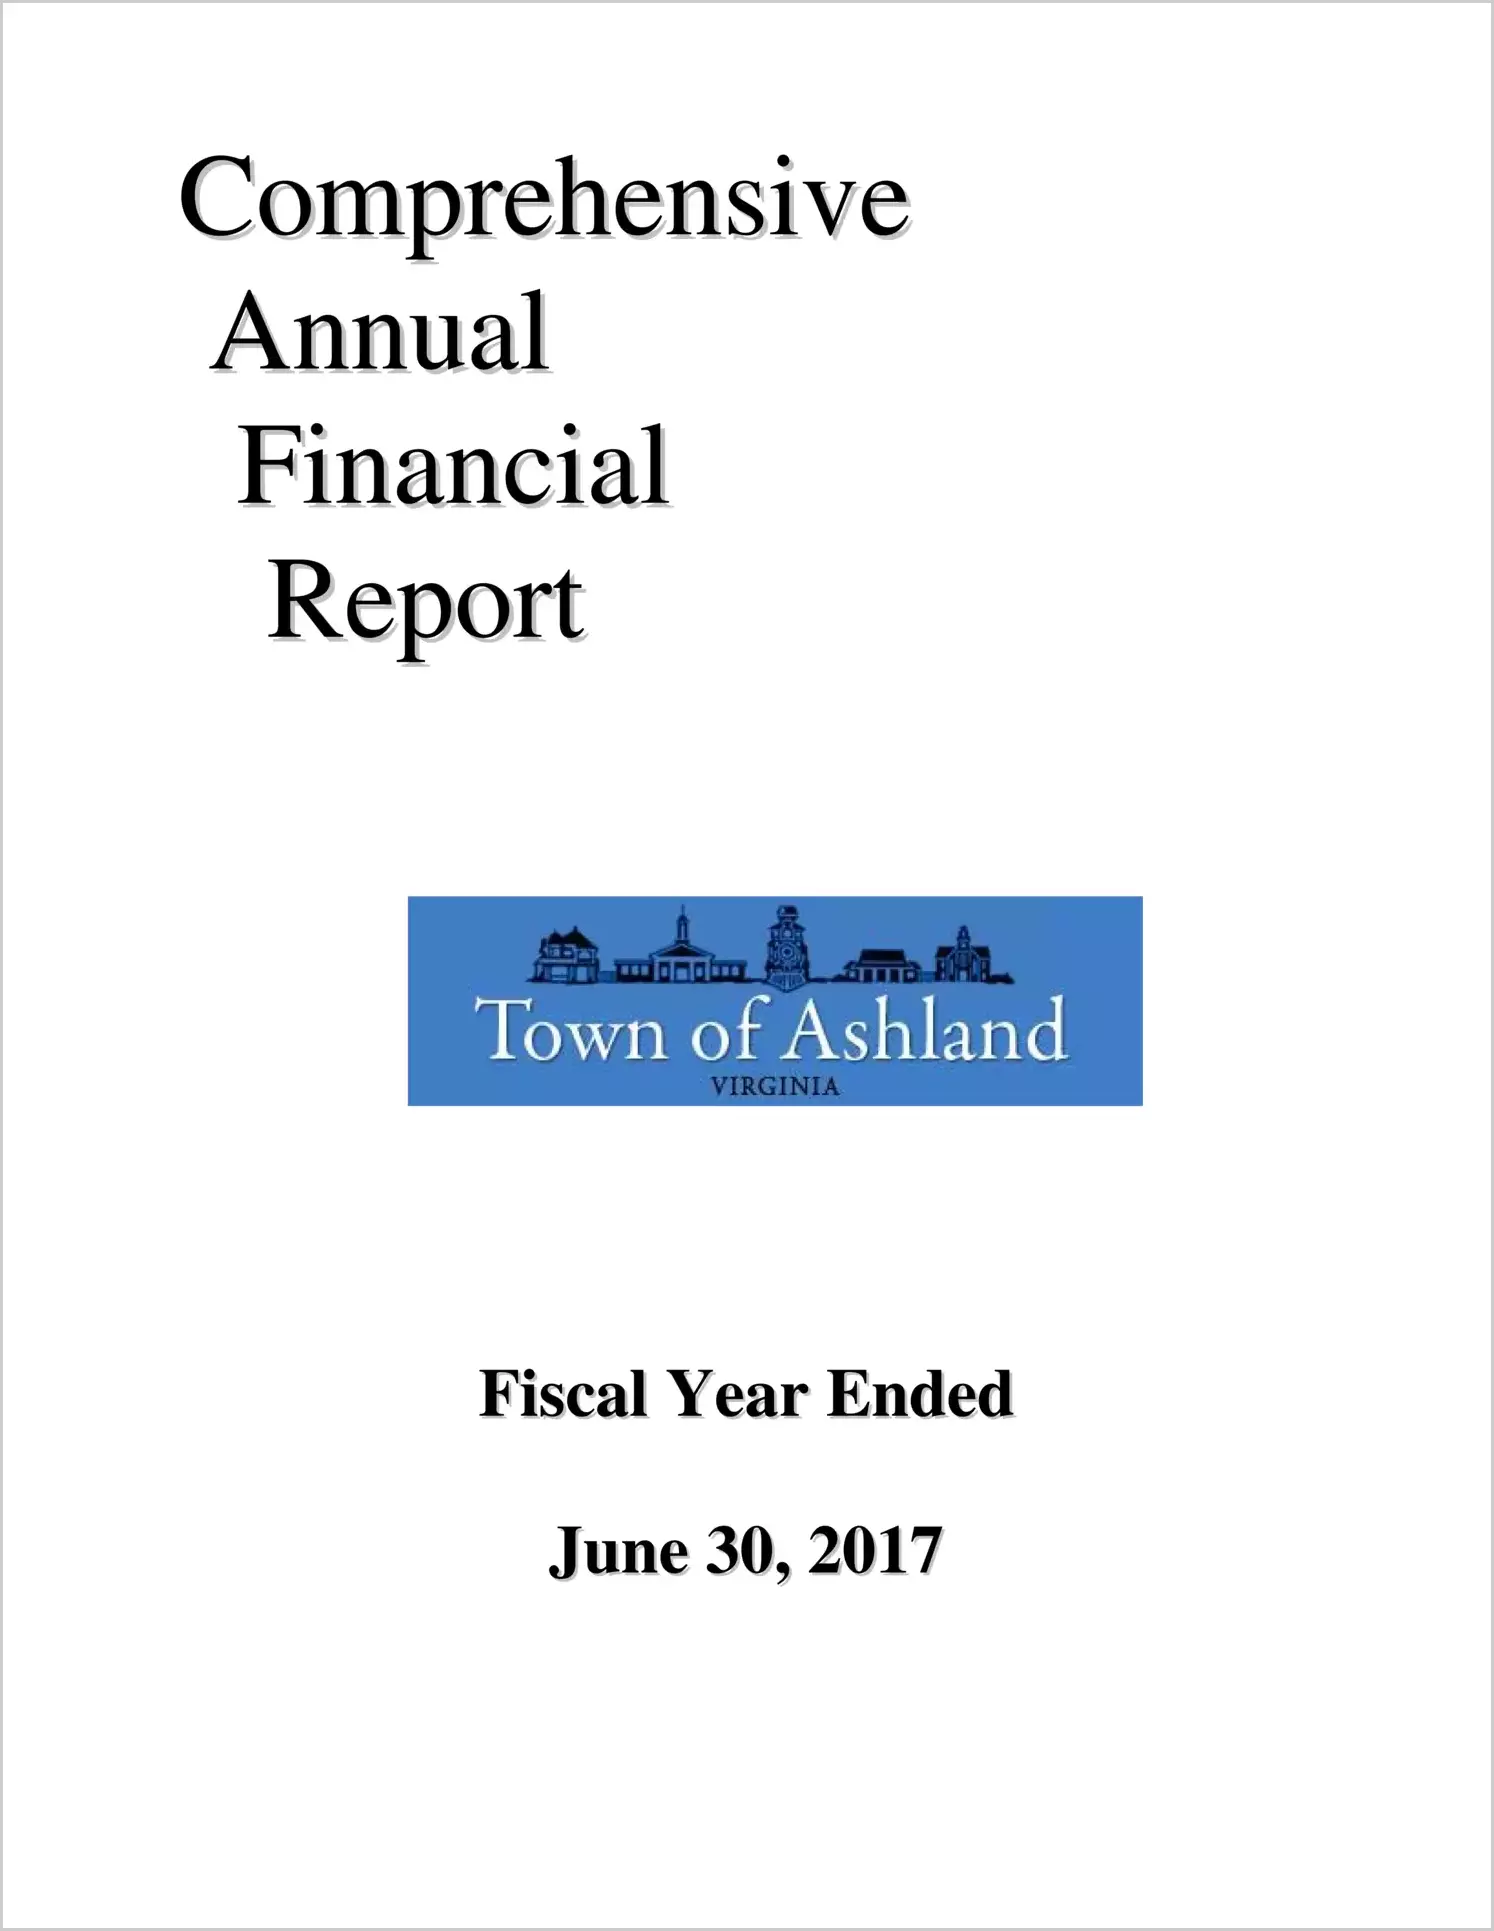 2017 Annual Financial Report for Town of Ashland